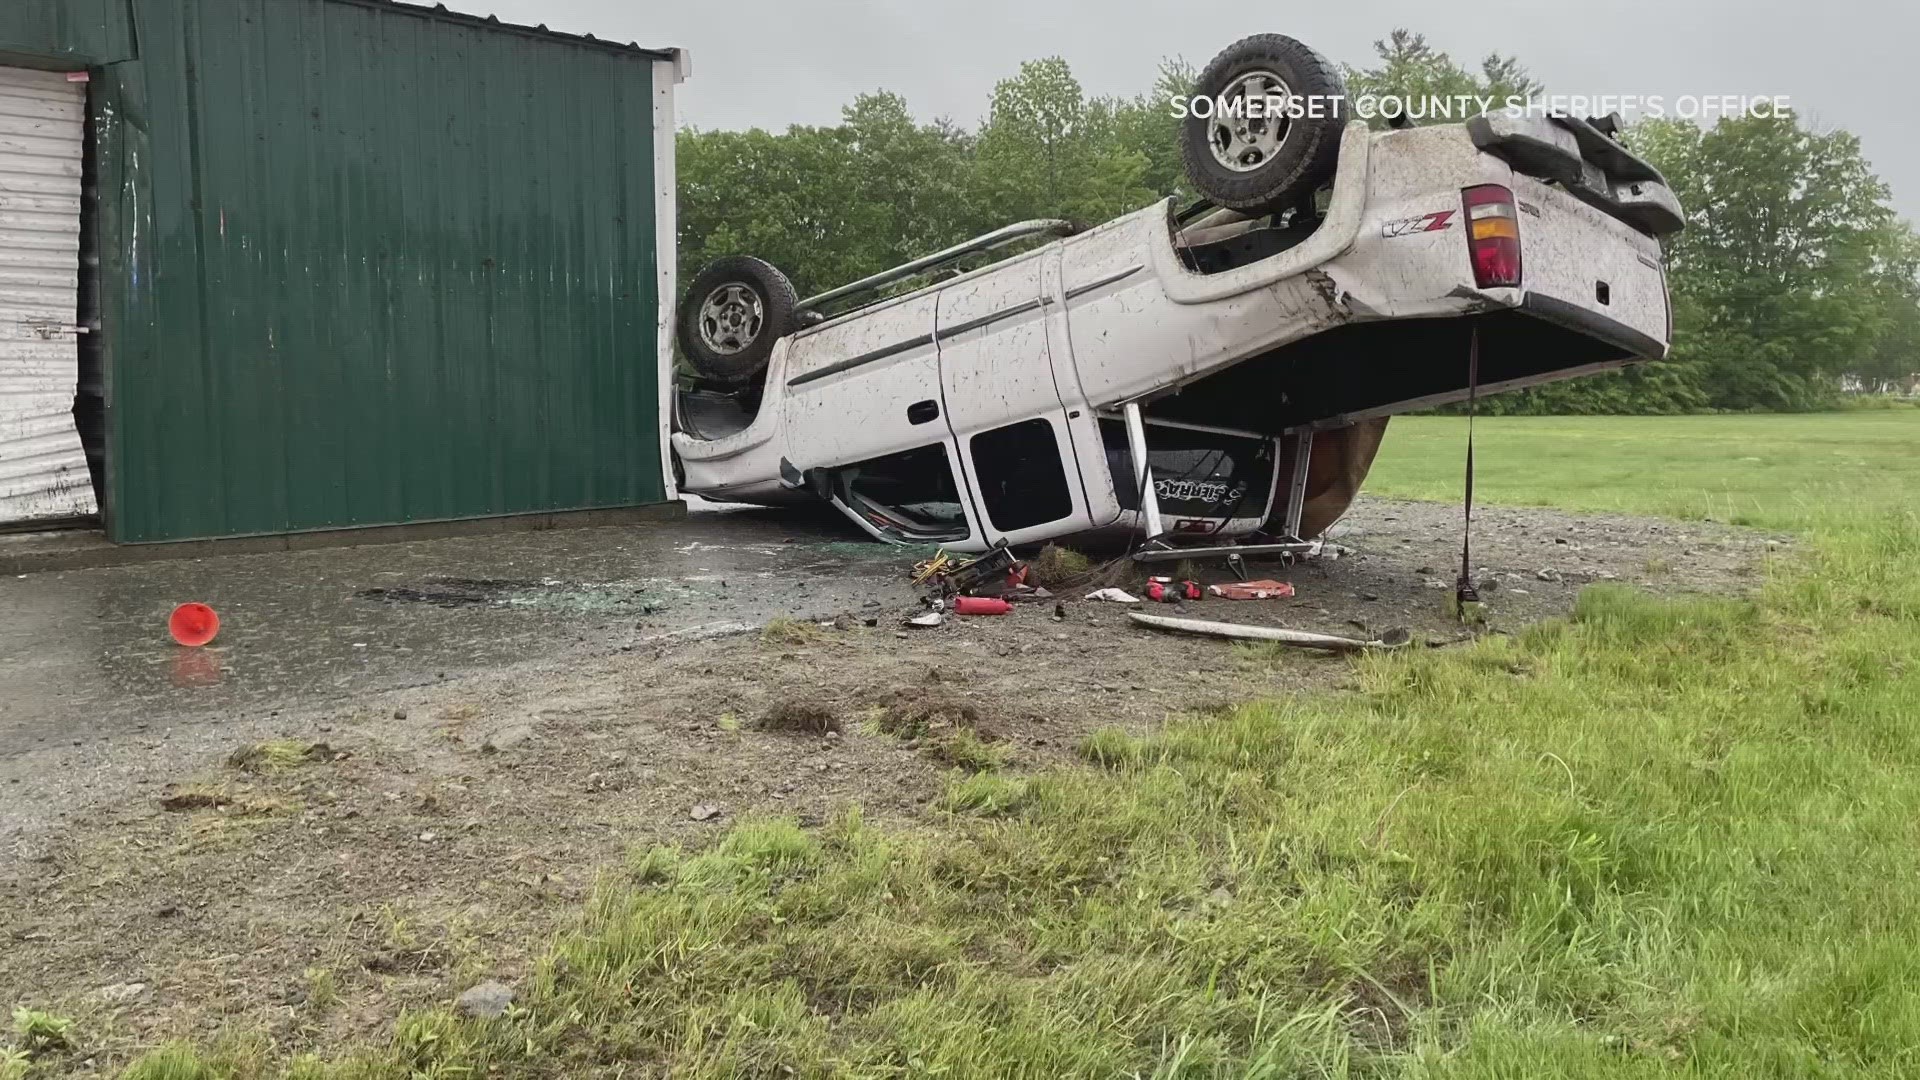 After leaving the roadway, the pickup truck struck a storage building before it rolled over and came to a rest on its roof, deputies said.